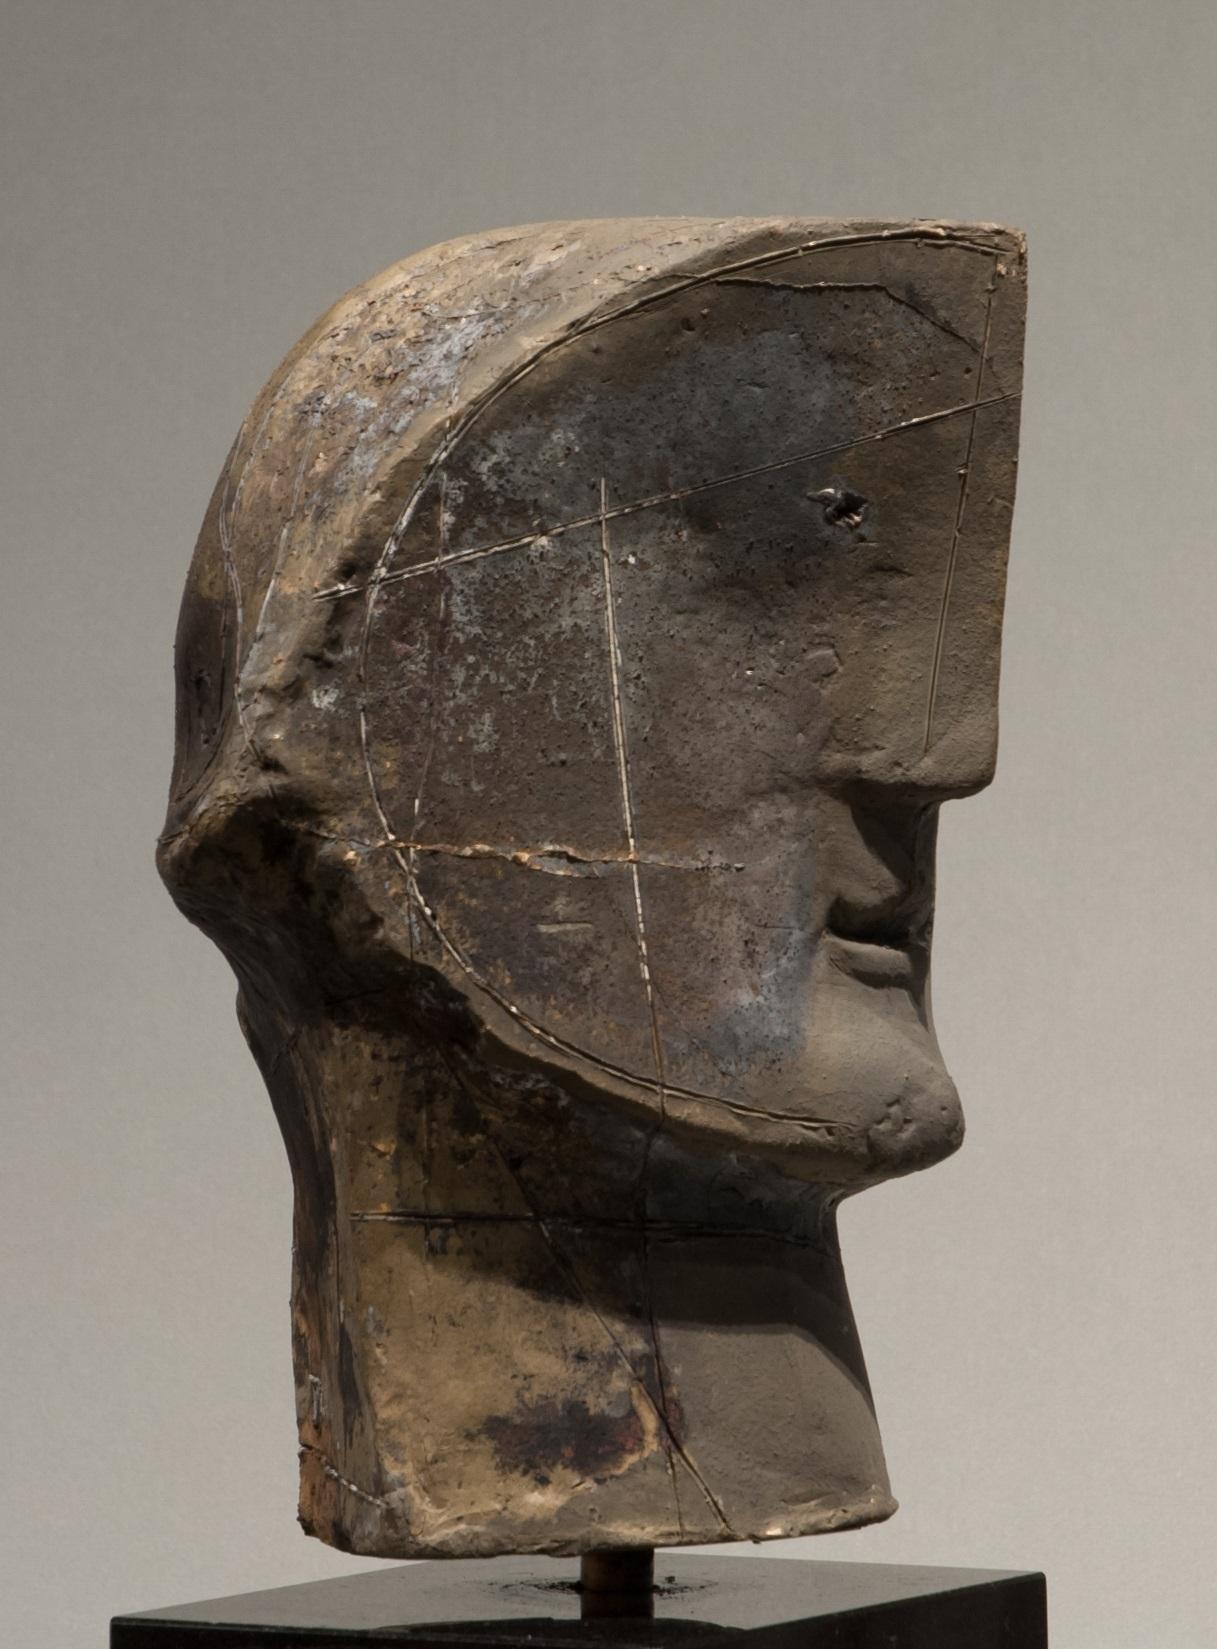 Inner Circle (Casting Scale) Bronze Sculpture Figurative Abstract Head In Stock

Junghans (1956, Recklinghausen) creates abstract sculptures in stone, wood and bronze, mostly torsos and primal portraits, in a primitive, cubic and expressionistic